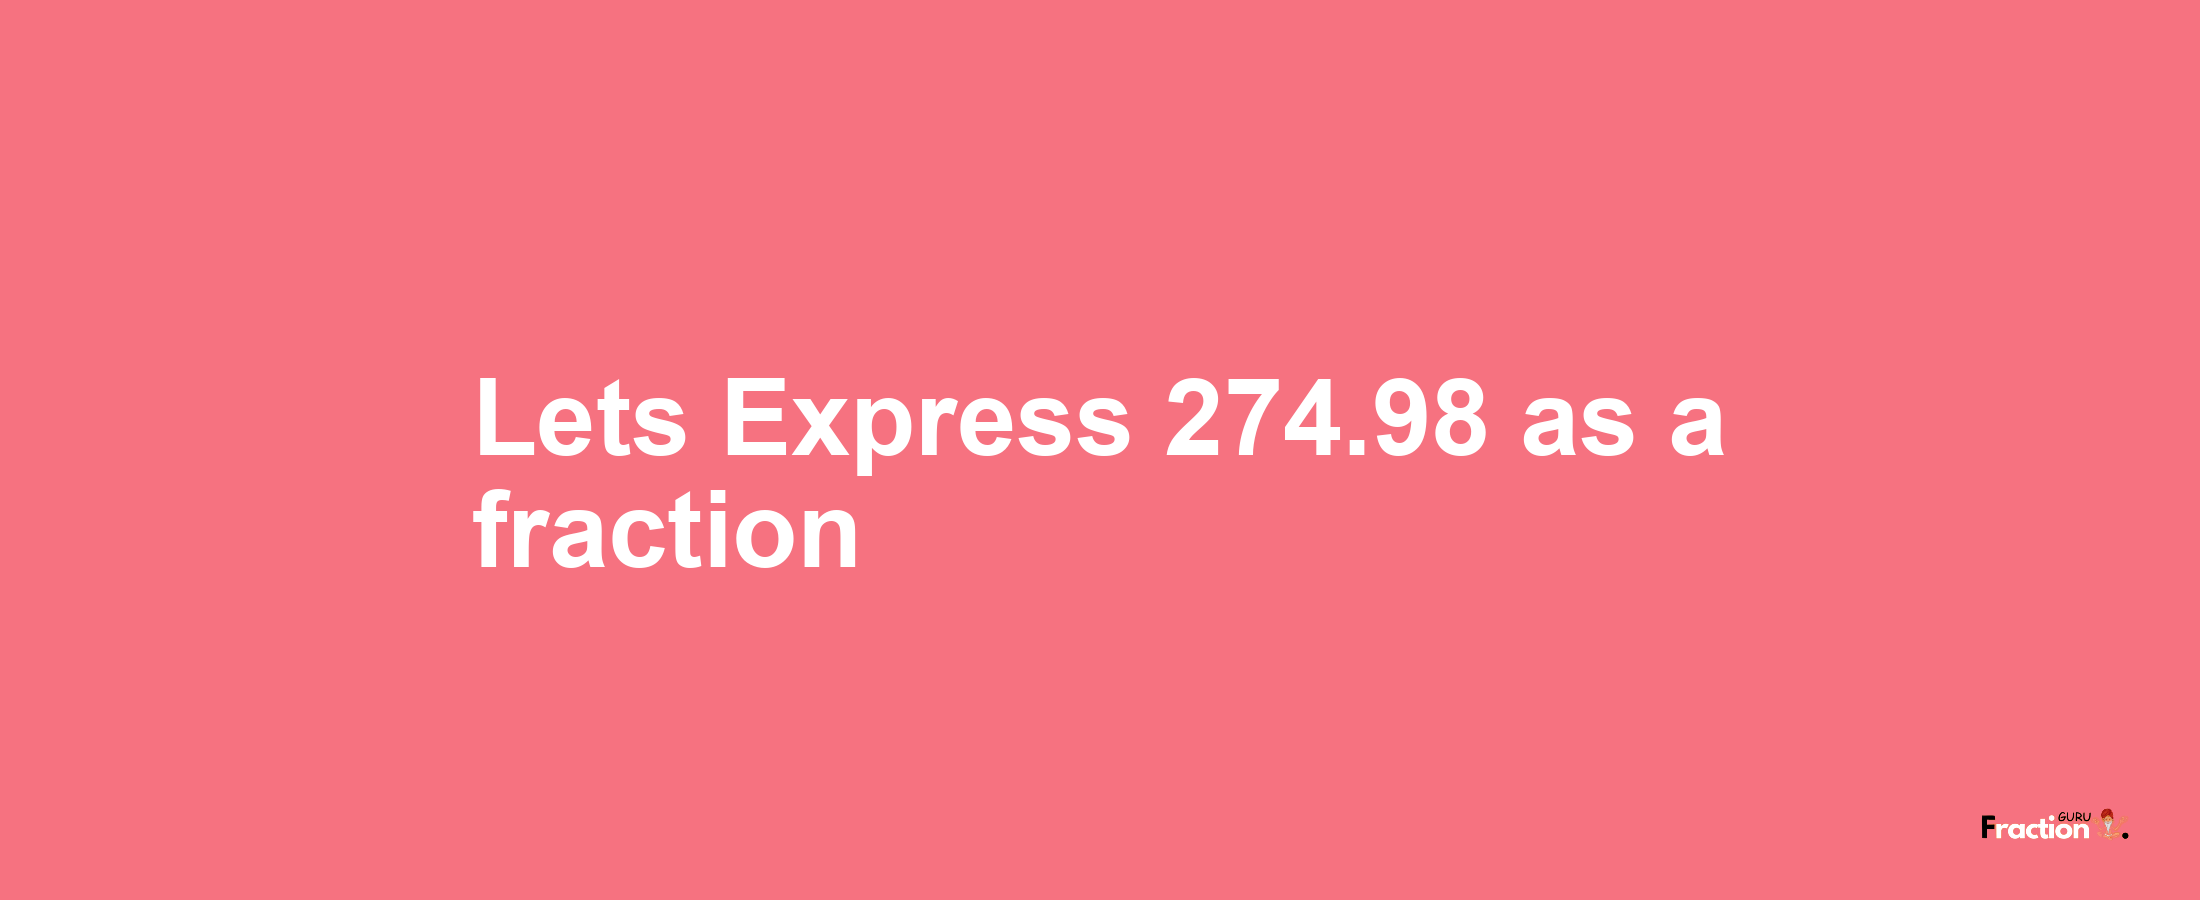 Lets Express 274.98 as afraction